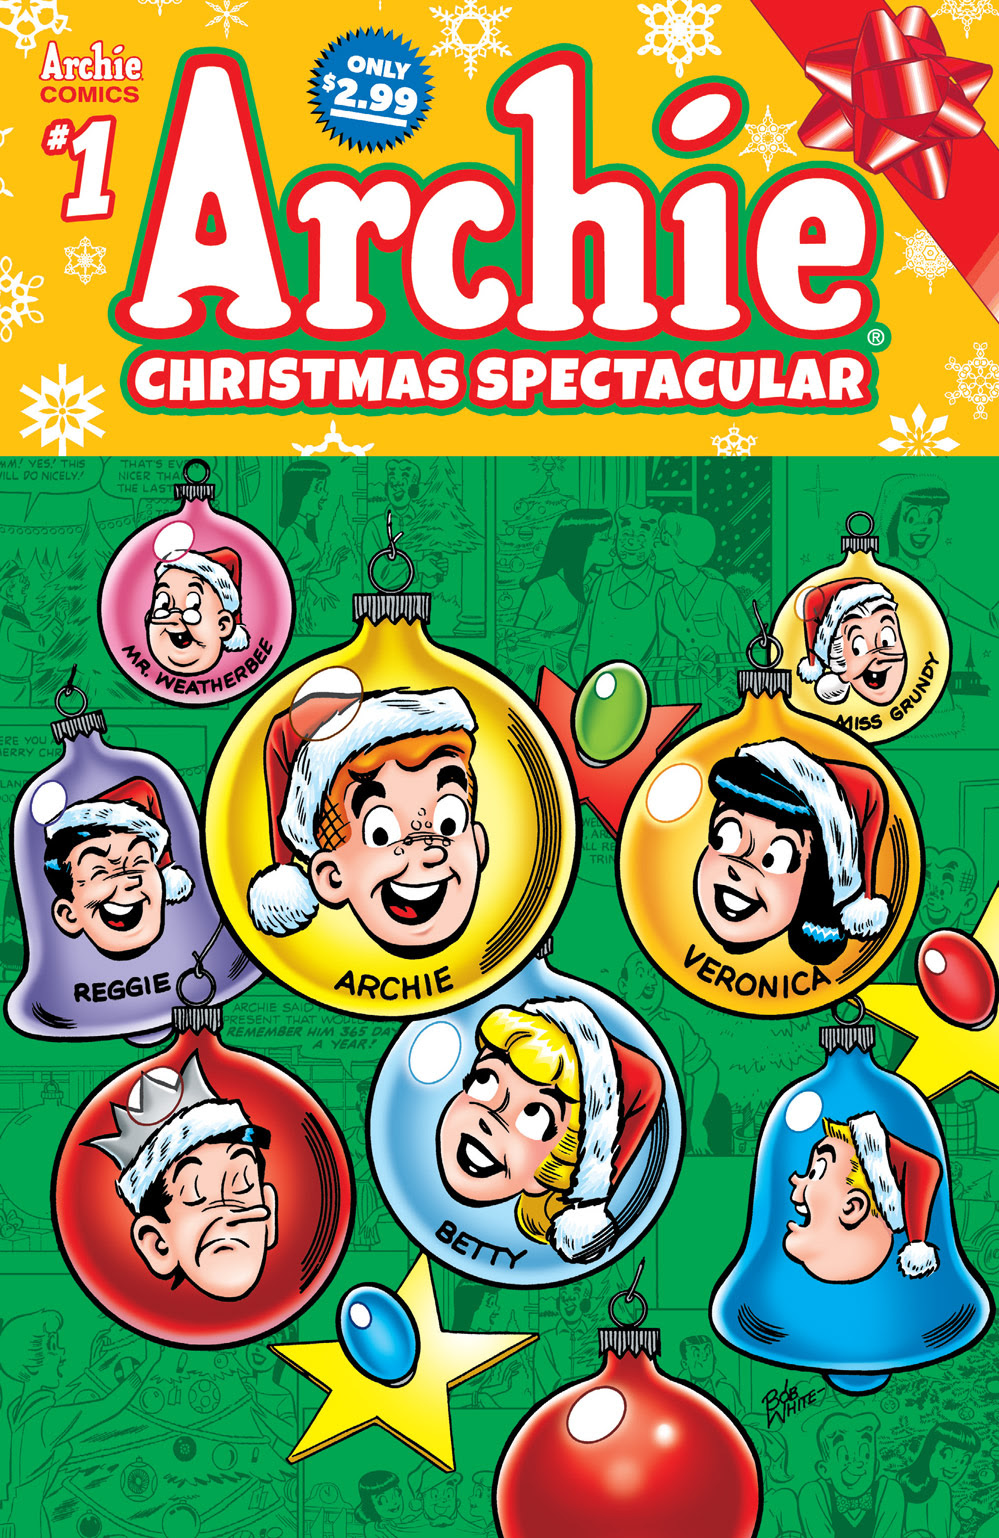 The Archie Christmas Spectacular #1 Is Merry And Bright – COMICON